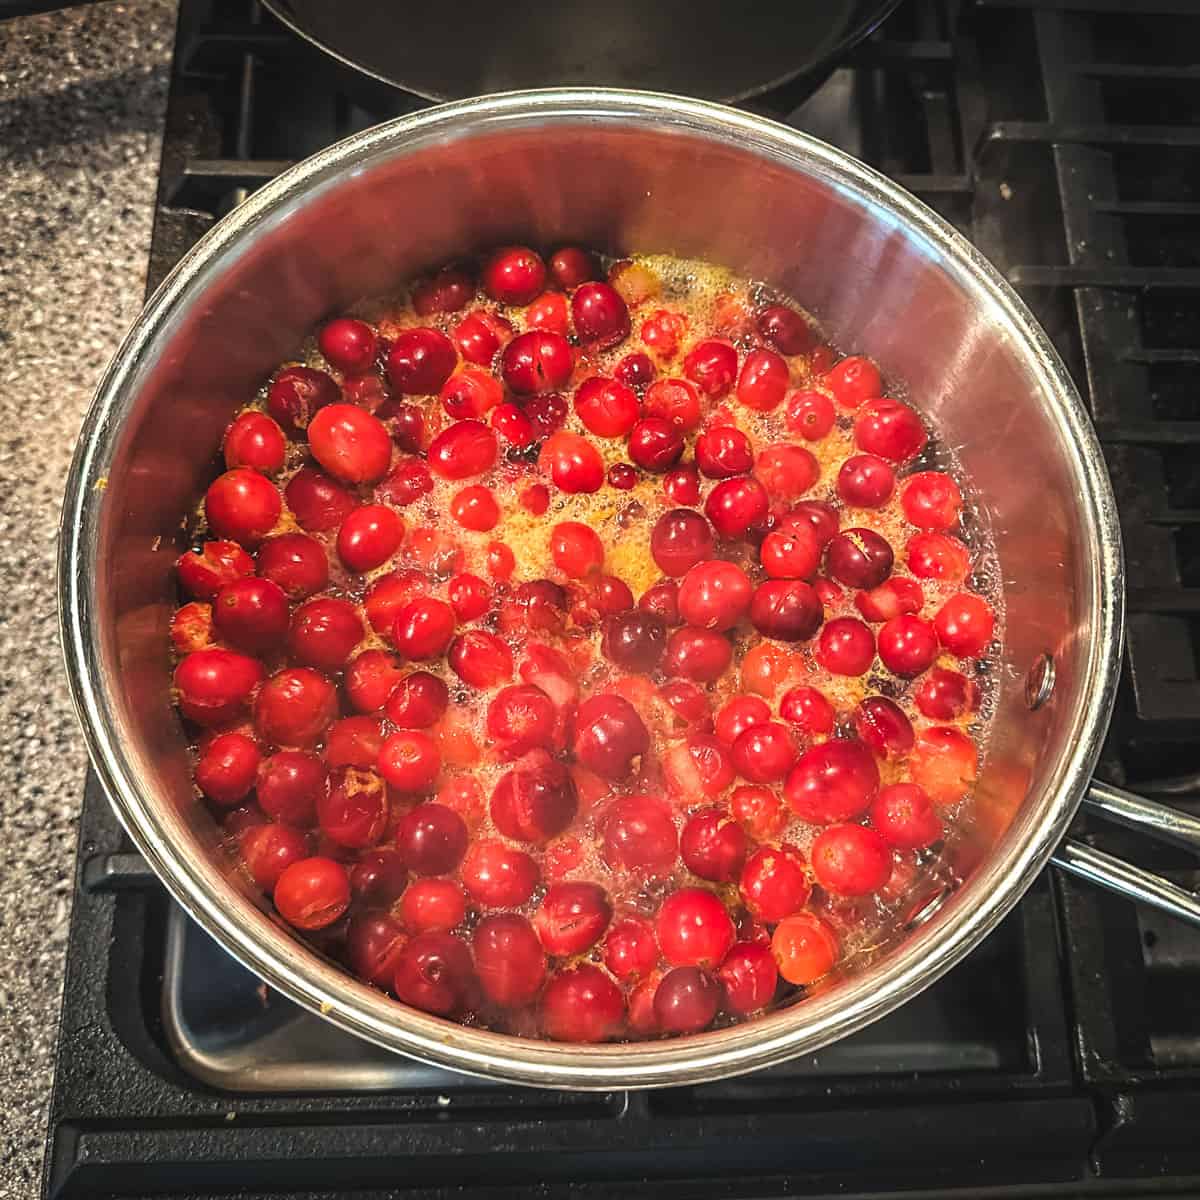 Cranberries and other ingredients boiling in a pot, top view. 